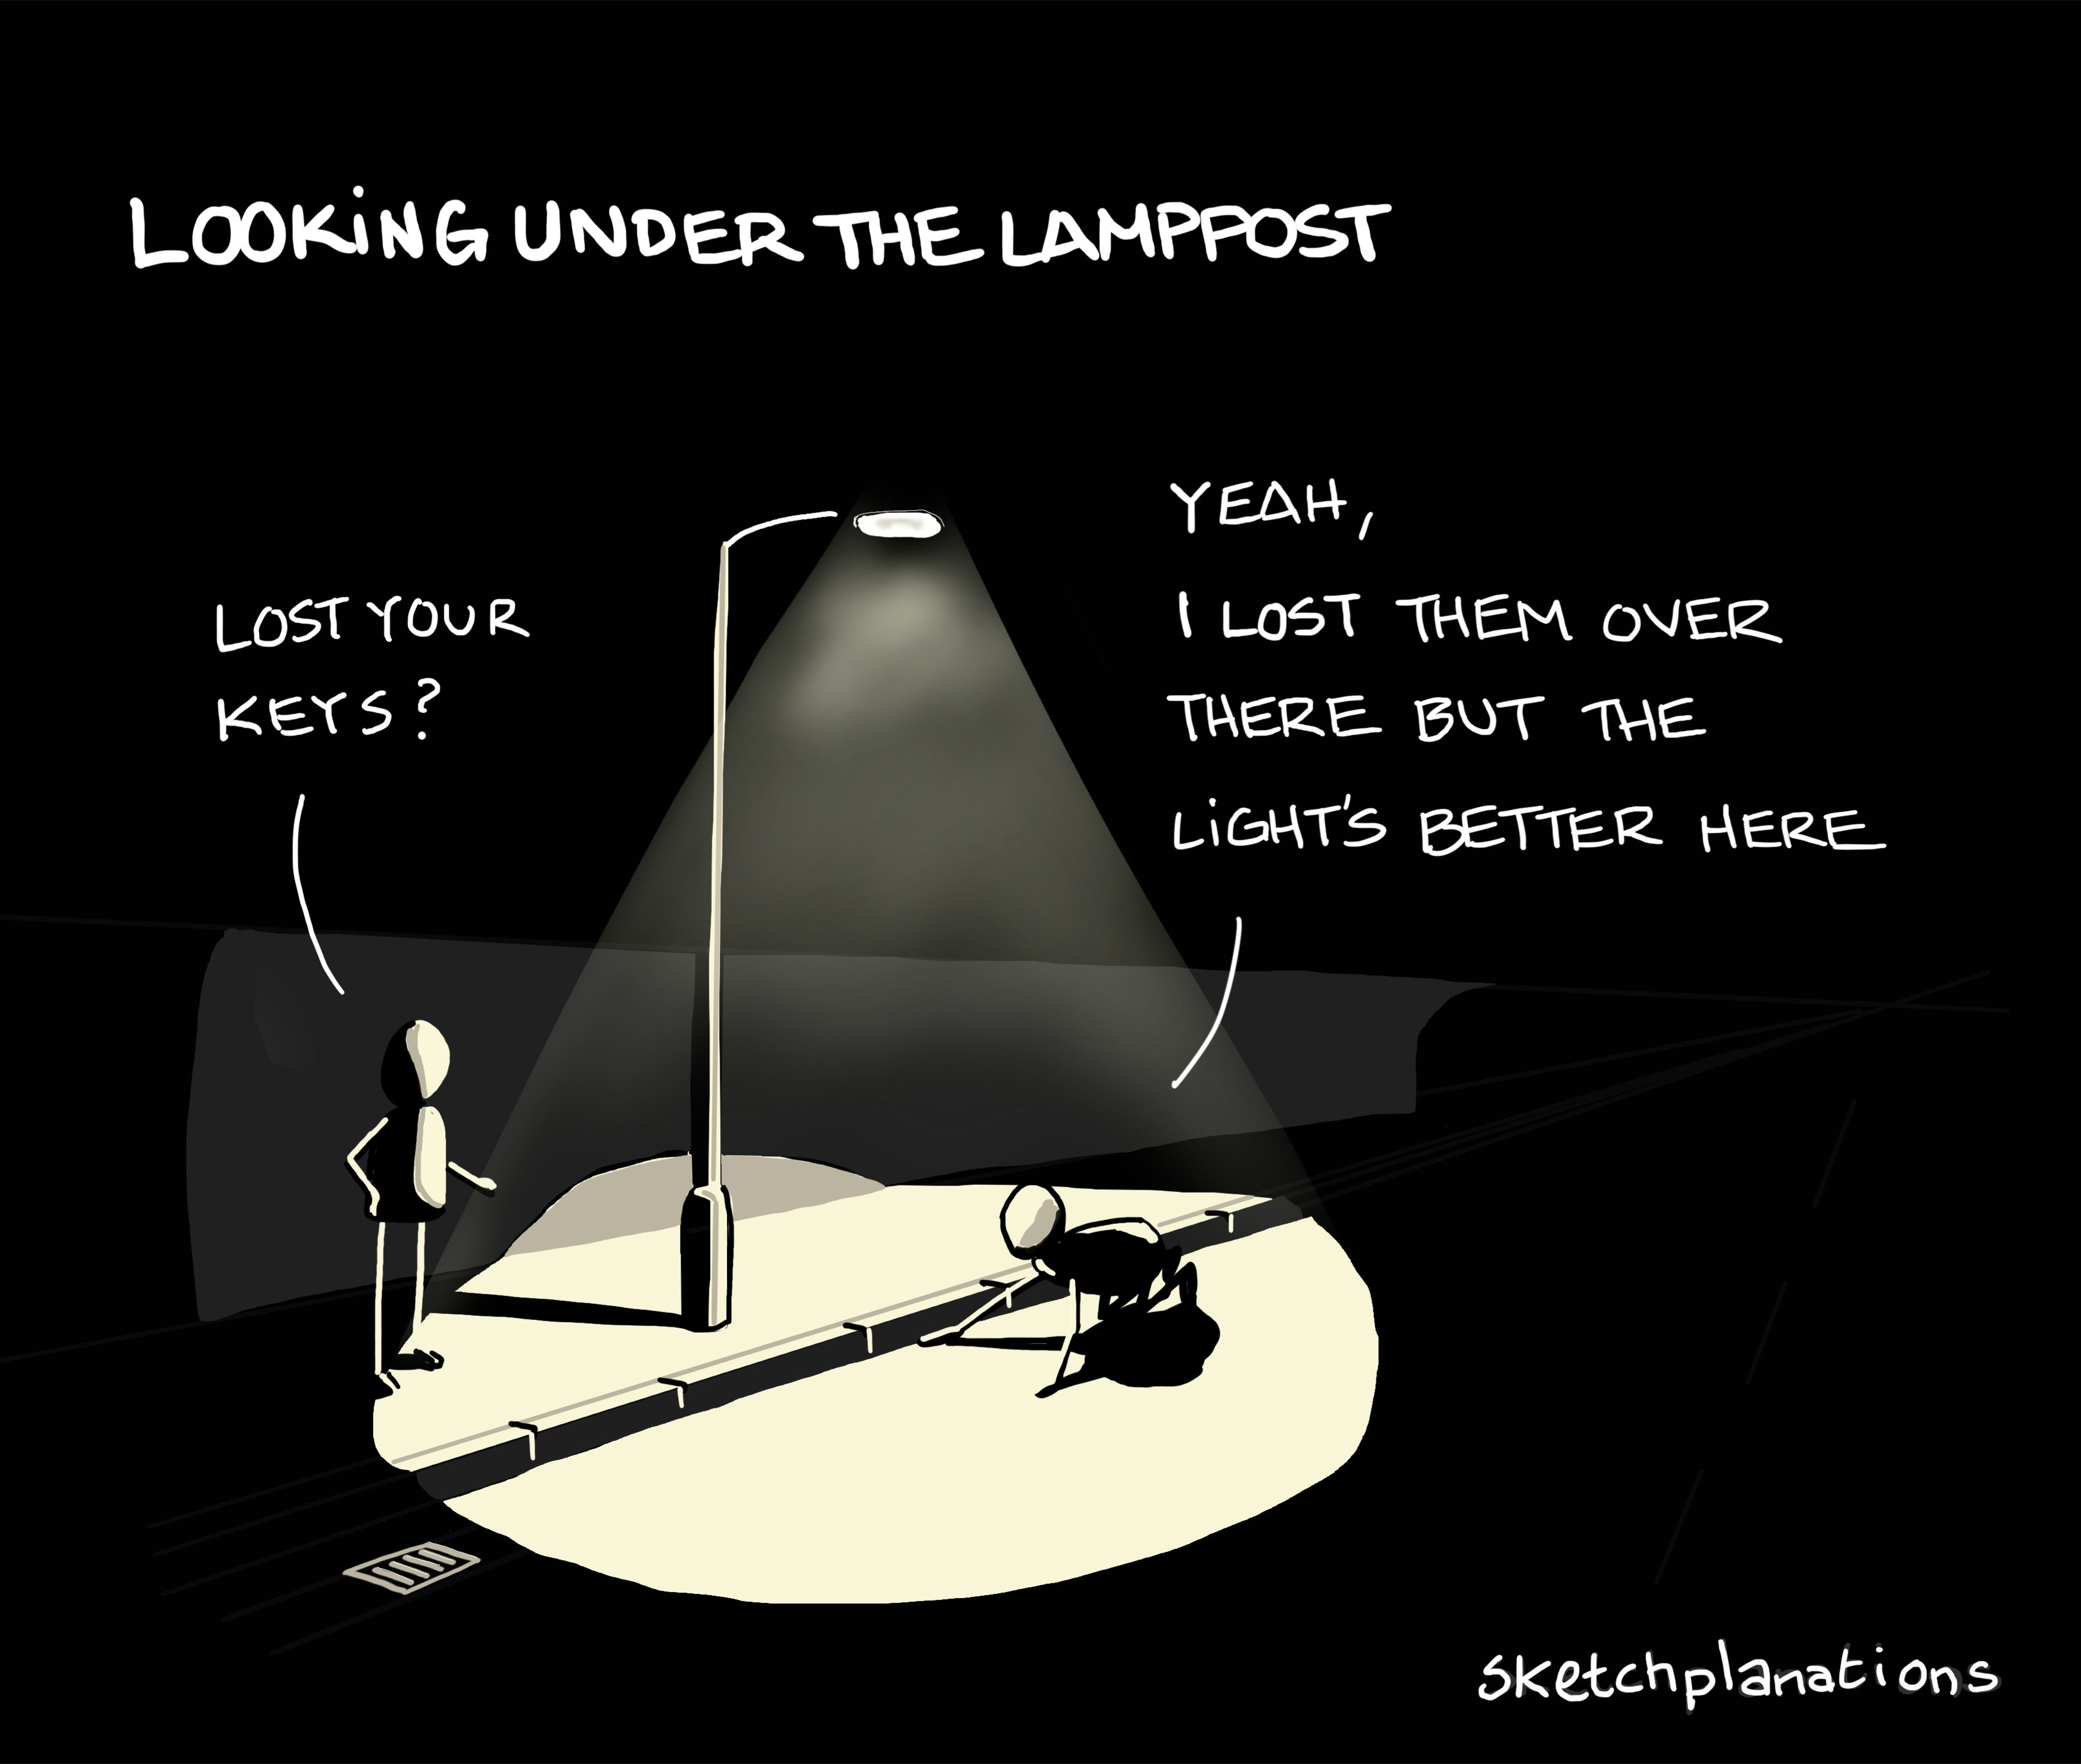 Looking under the lamppost: a person asks someone scrabbling on the floor under a lamppost at night if they've lost their keys. The person replies they lost them elsewhere, but the light's much better here.